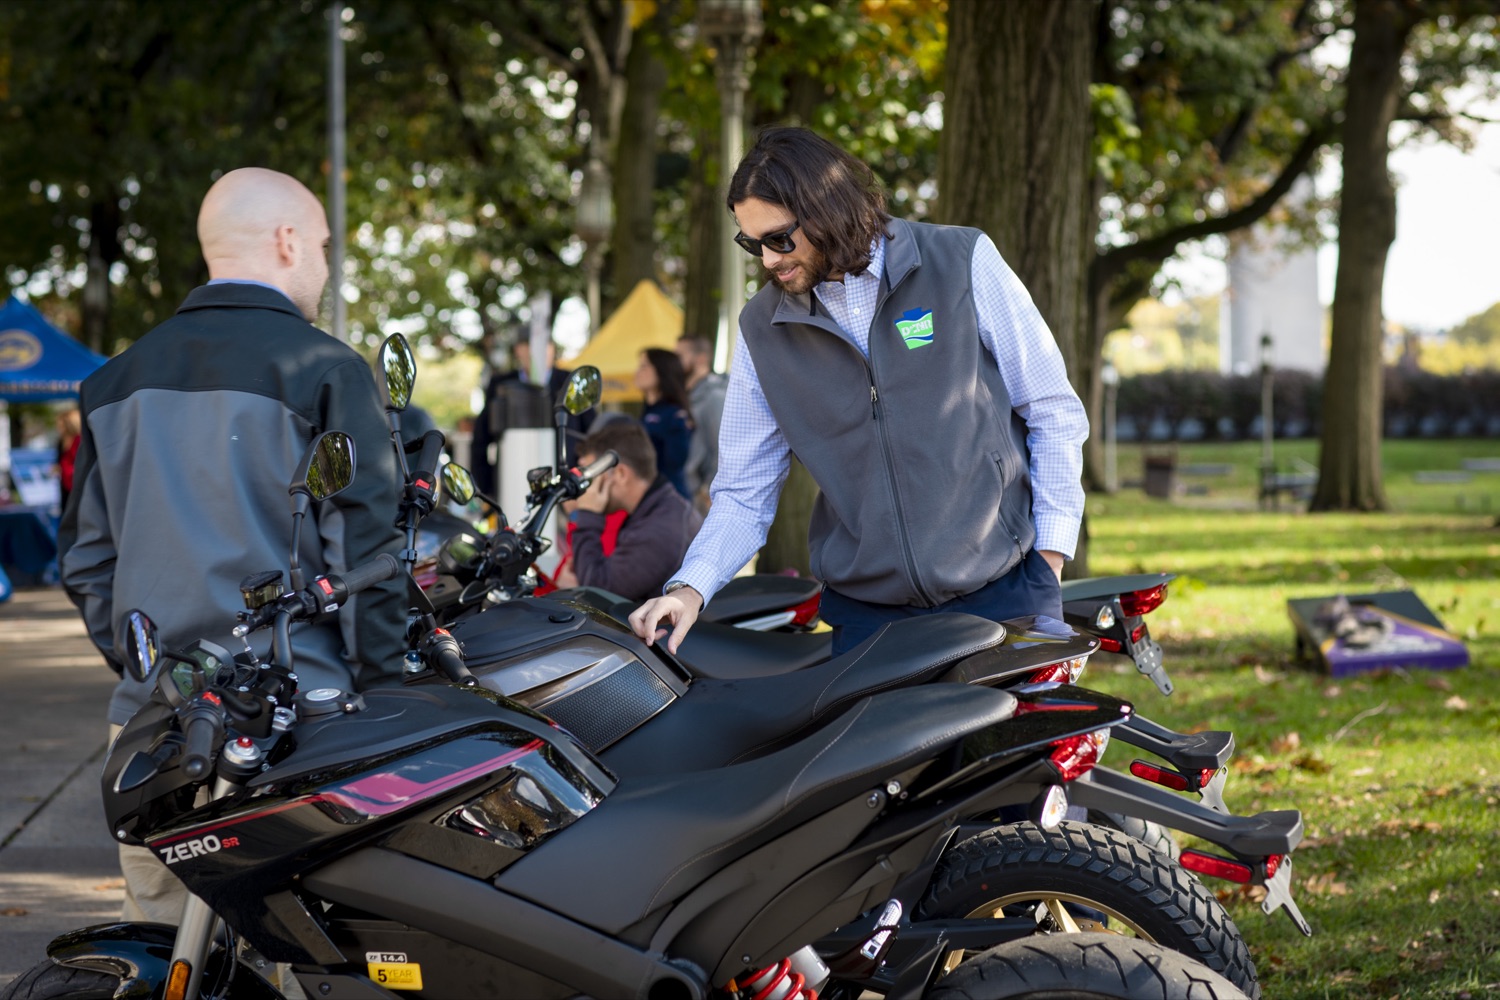 Members of the public interact with displays featuring electric and hybrid technology during a Ride & Drive Event at the Capitol Complex on October 23, 2019.<br><a href="https://filesource.amperwave.net/commonwealthofpa/photo/17449_DGS_DRIVE_ELECTRIC_CZ_08.JPG" target="_blank">⇣ Download Photo</a>